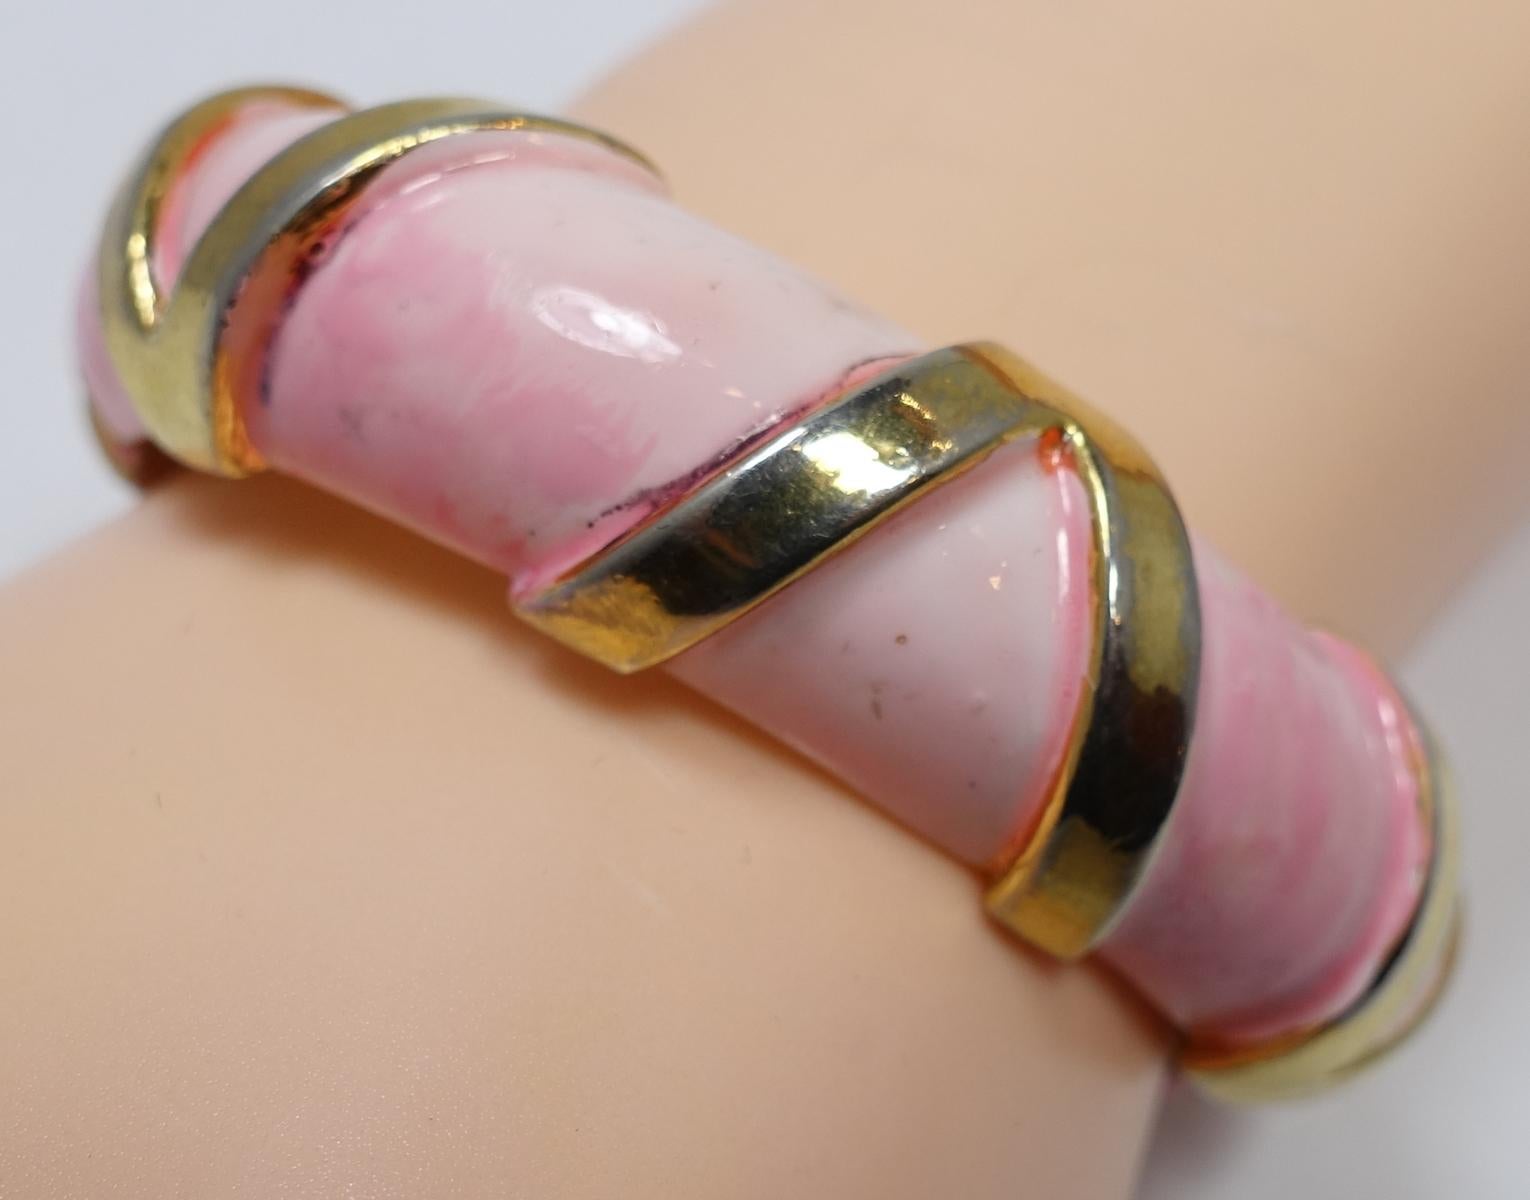 This vintage signed Robert bracelet features a pale pink/coral enameling with gold tone bars on top.  In excellent condition, this bracelet measures 6-1/2” around the inside x 5/8” and is signed “Original by Robert”.
